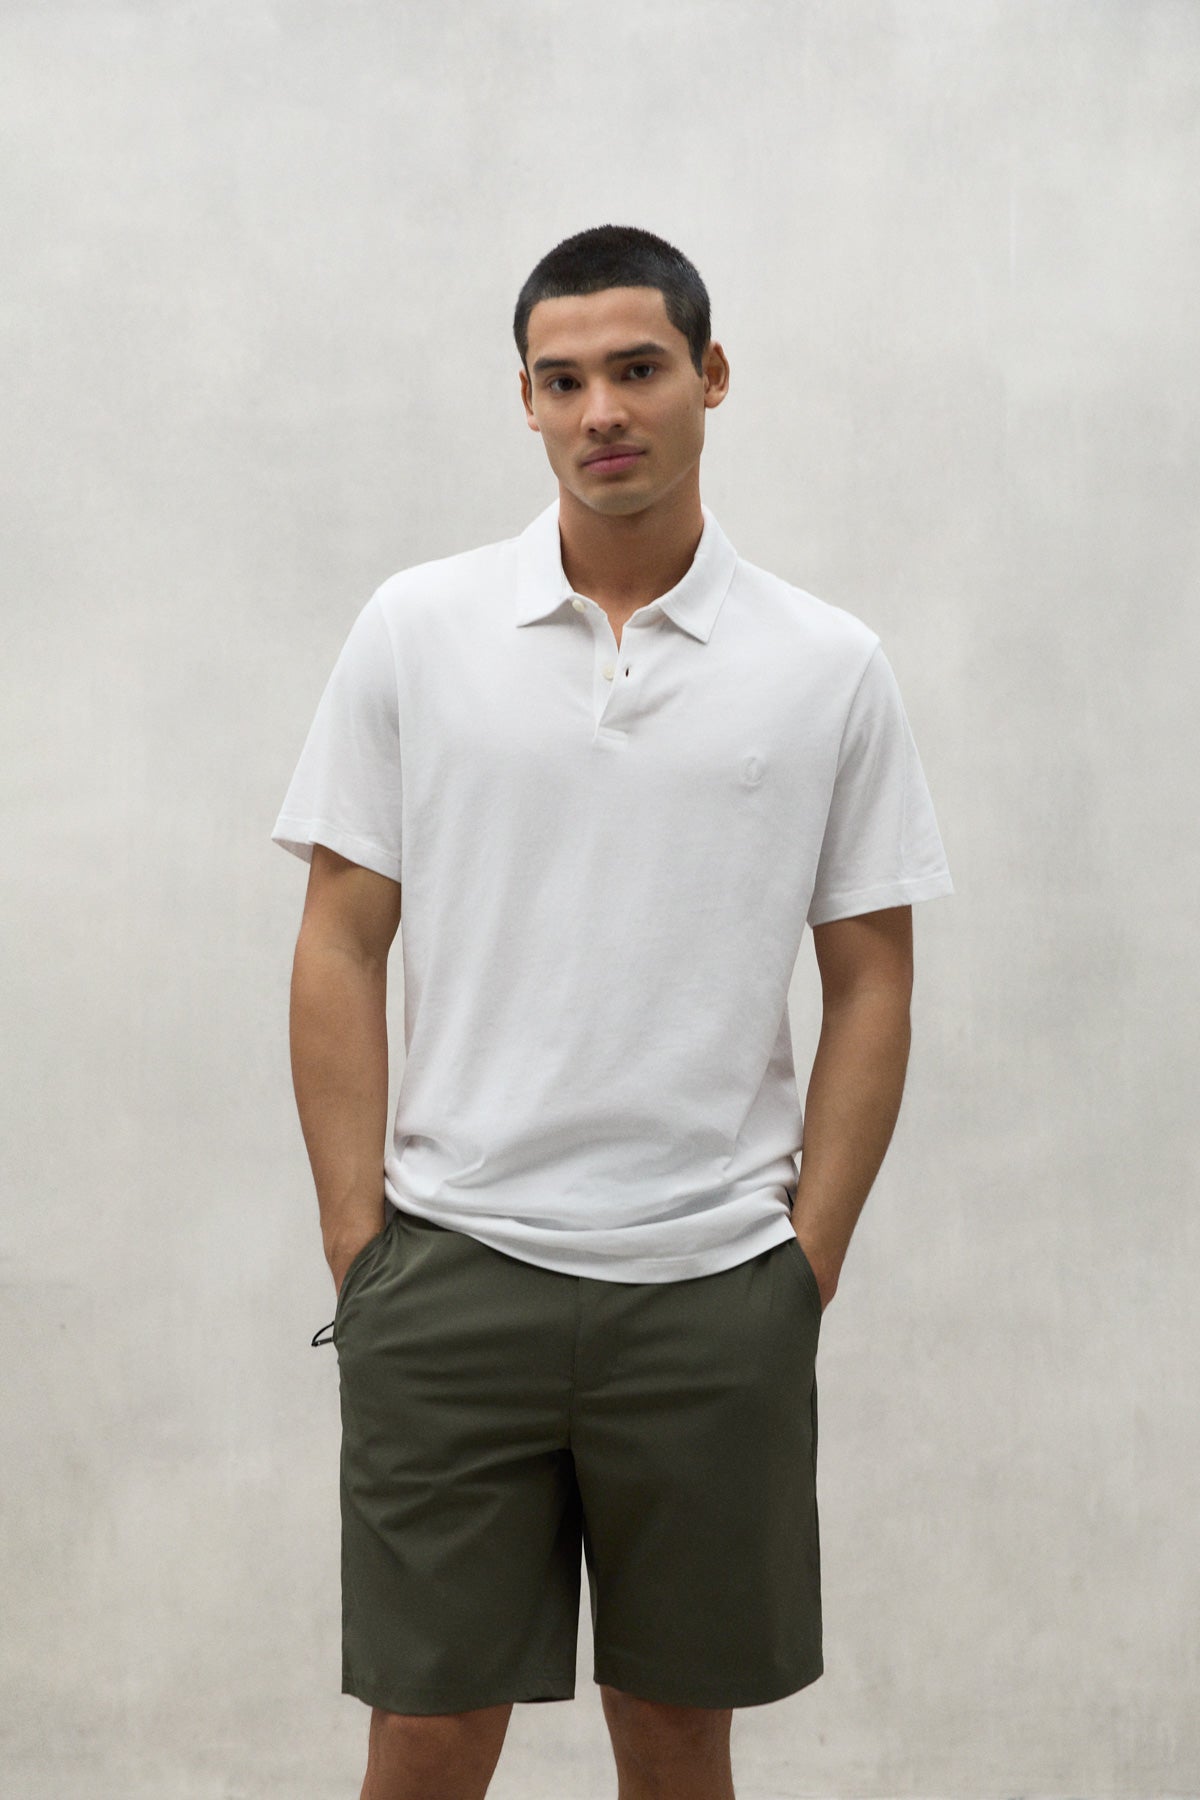 WHITE THEO JERSEY POLO SHIRT